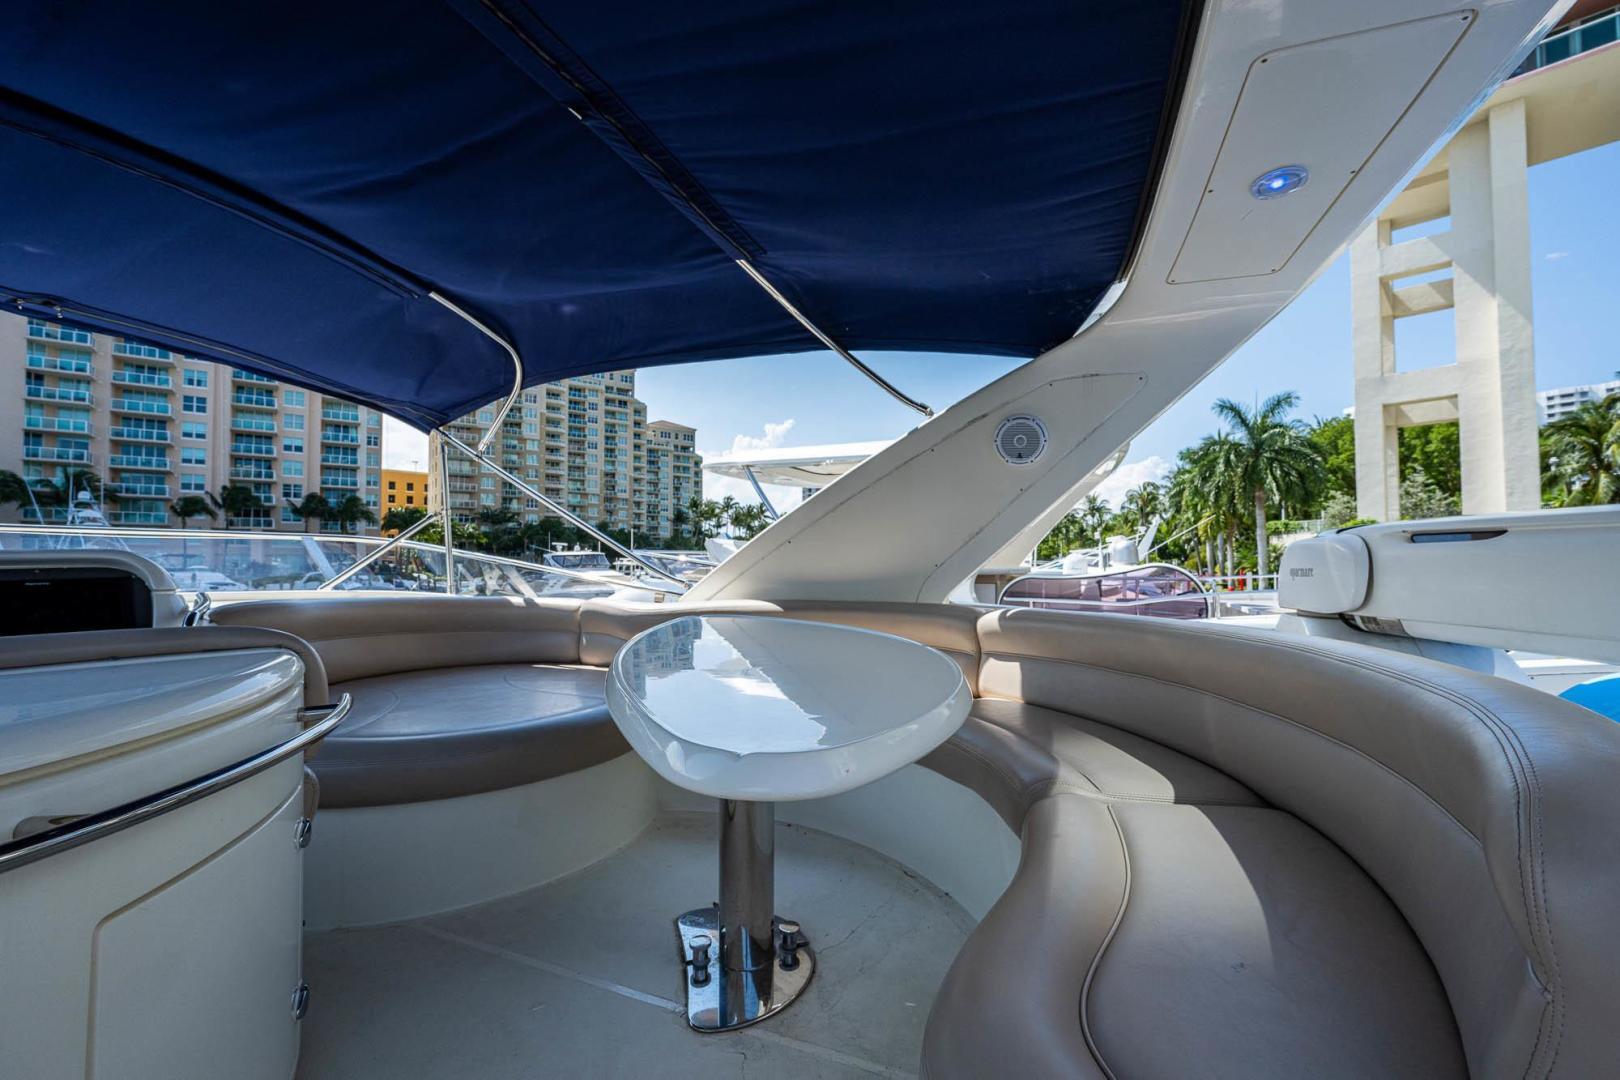 Azimut 55 Tranquilo - Flybridge seating and table